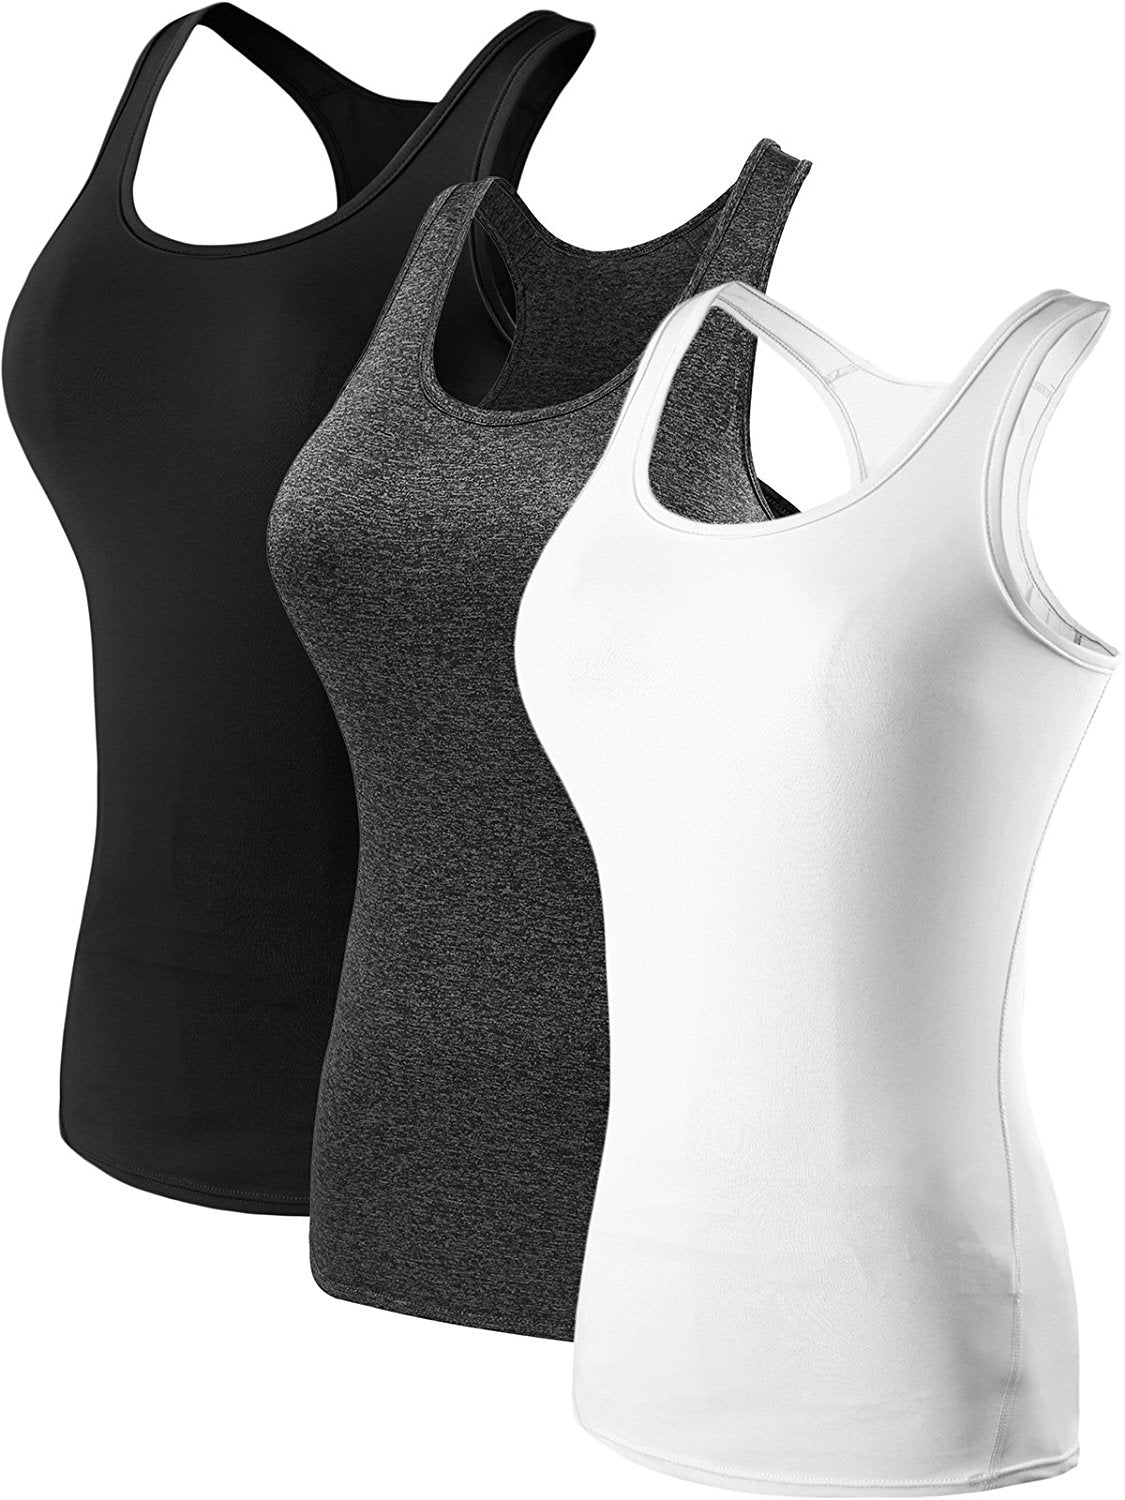 Neleus Women s 3 Pack Compression Base Layer Dry Fit Tank Top 04# 3 Pack:green,blue,red  Small / Bust:32.5-35 : : Clothing & Accessories